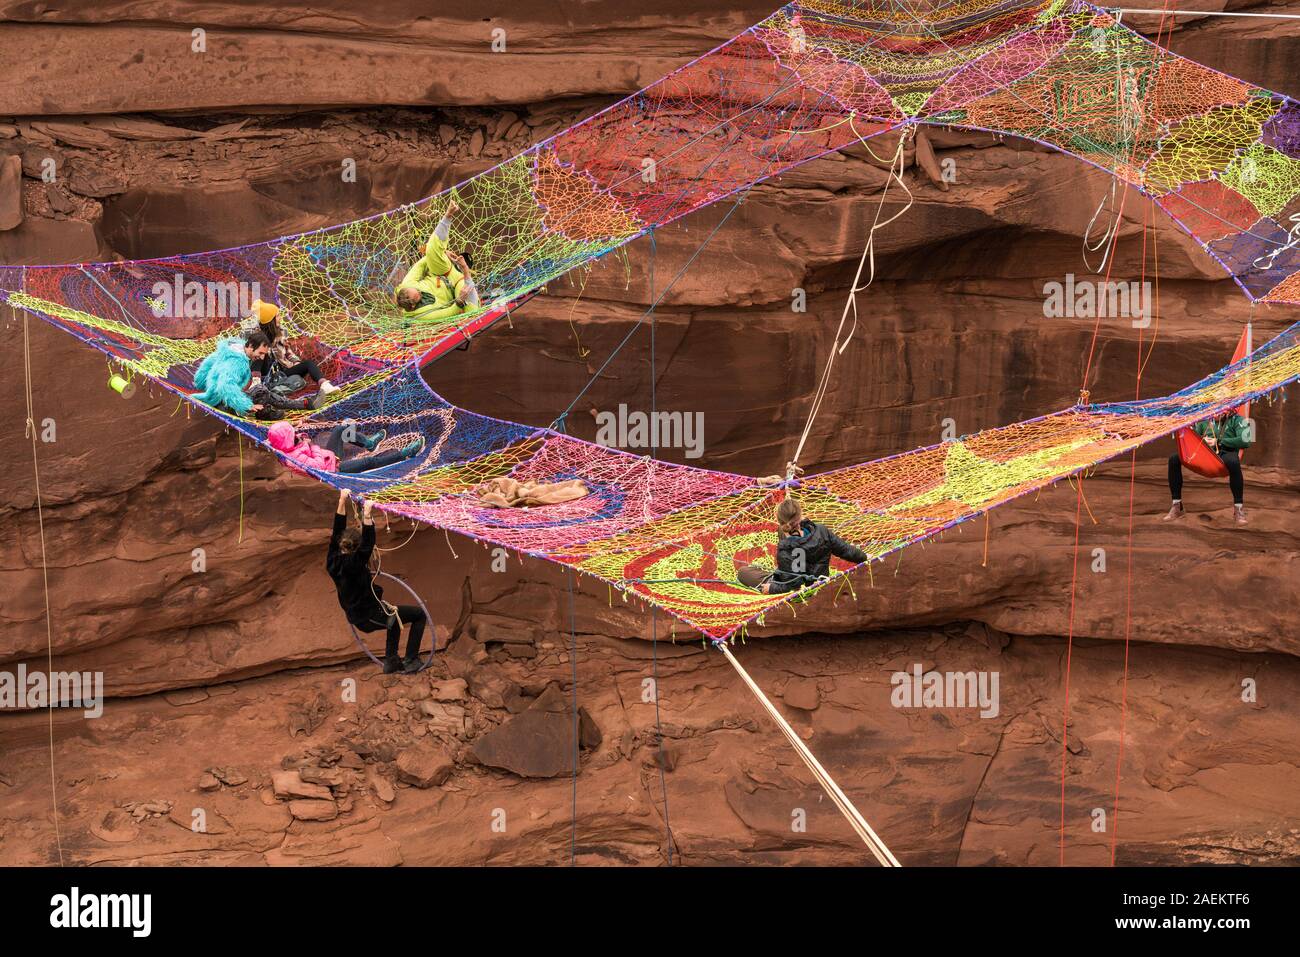 A group of slackliners play on the Space Net hundreds of feet above Mineral Canyon near Moab, Utah during a highline gathering. Stock Photo